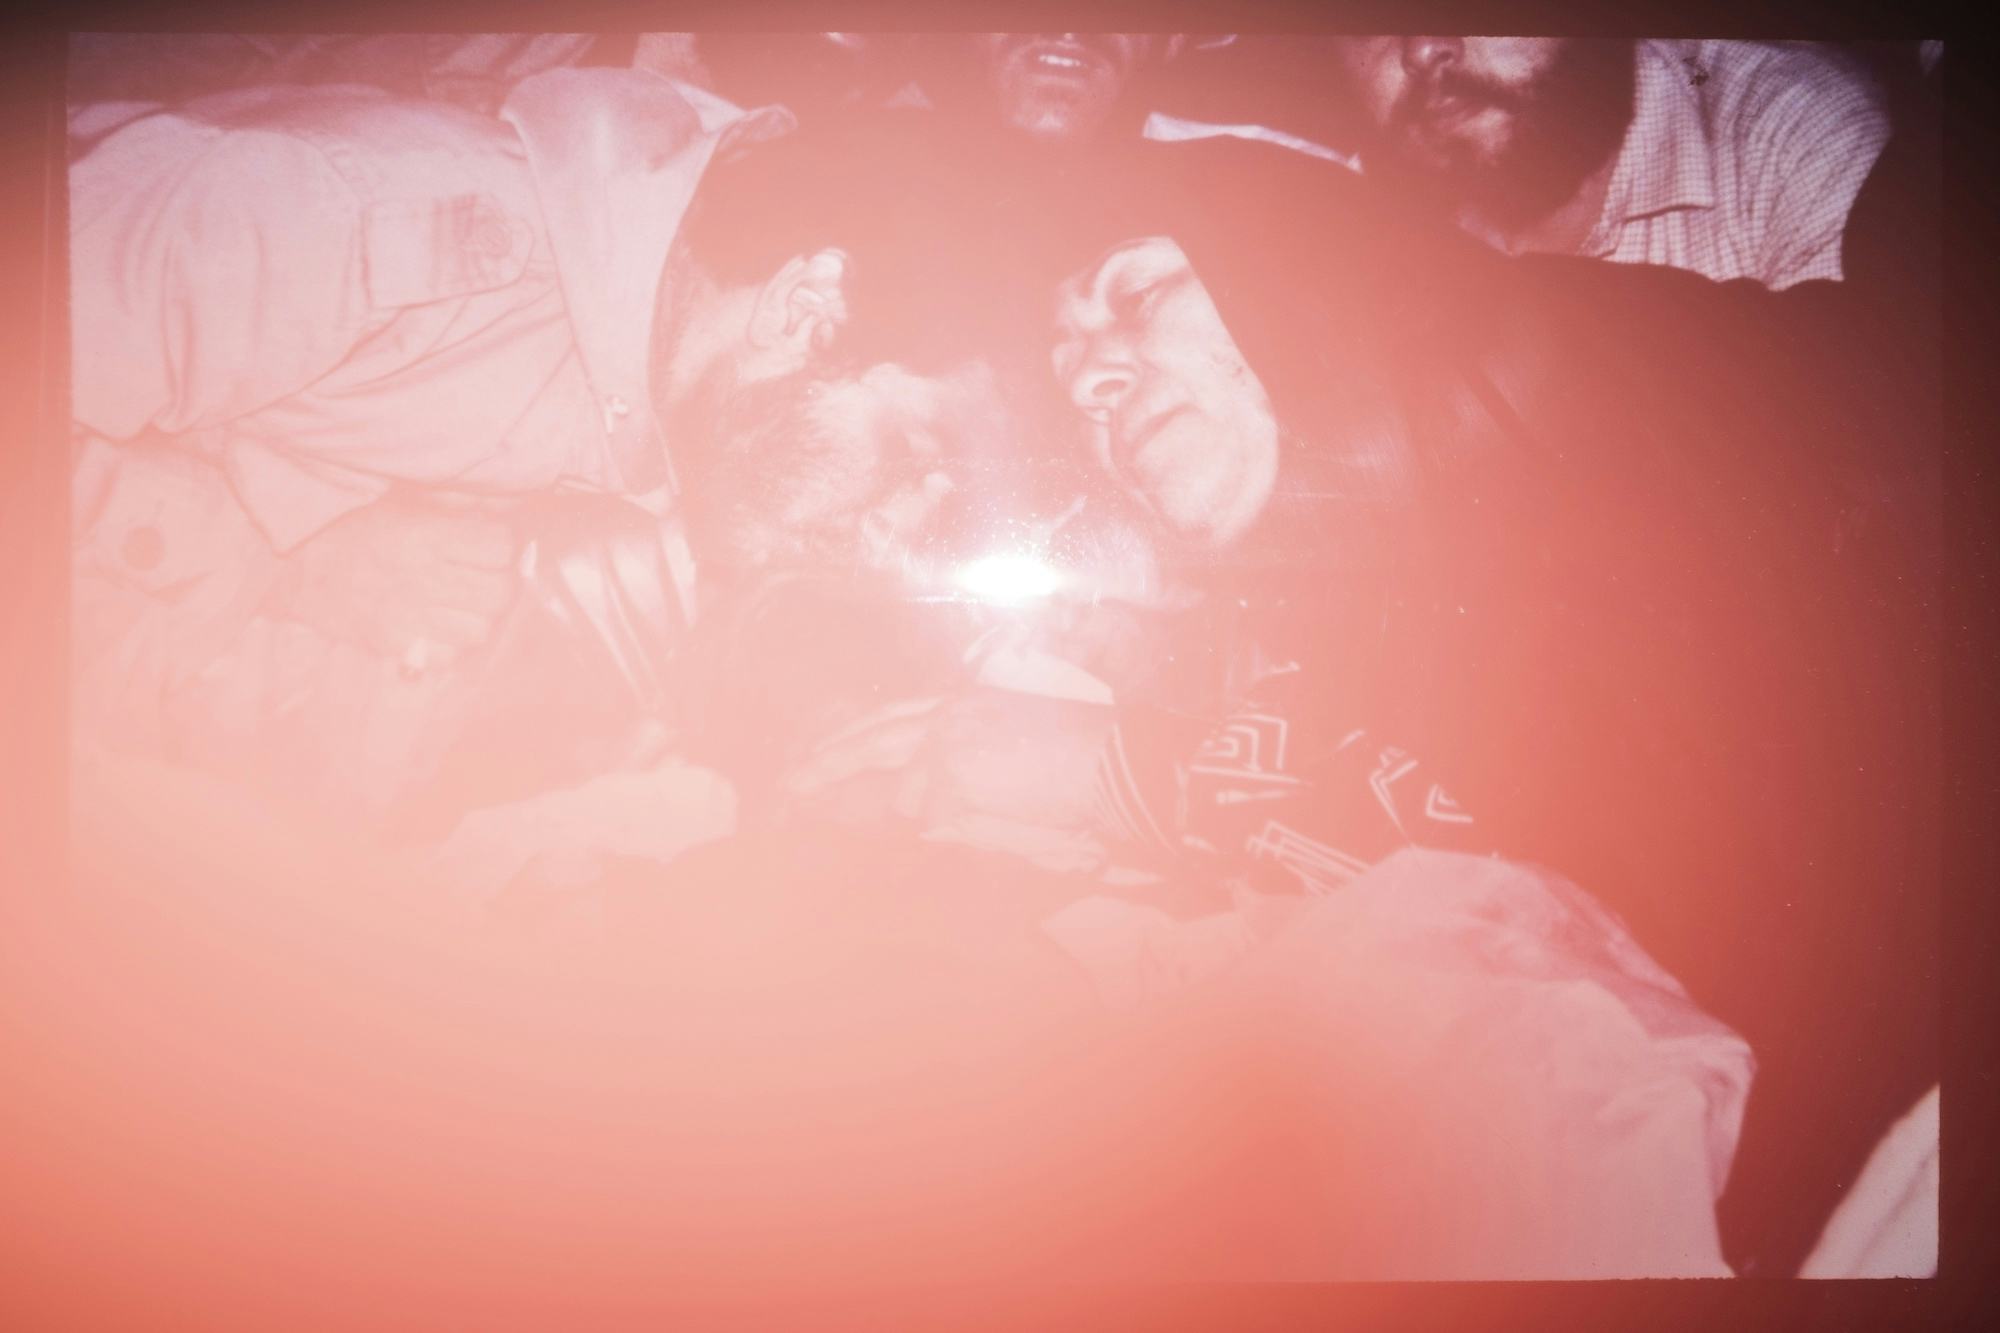 Photograph of an Iranian woman and man in mourning, the image has a red filter due to the flash. © Ghazaleh Rezaei